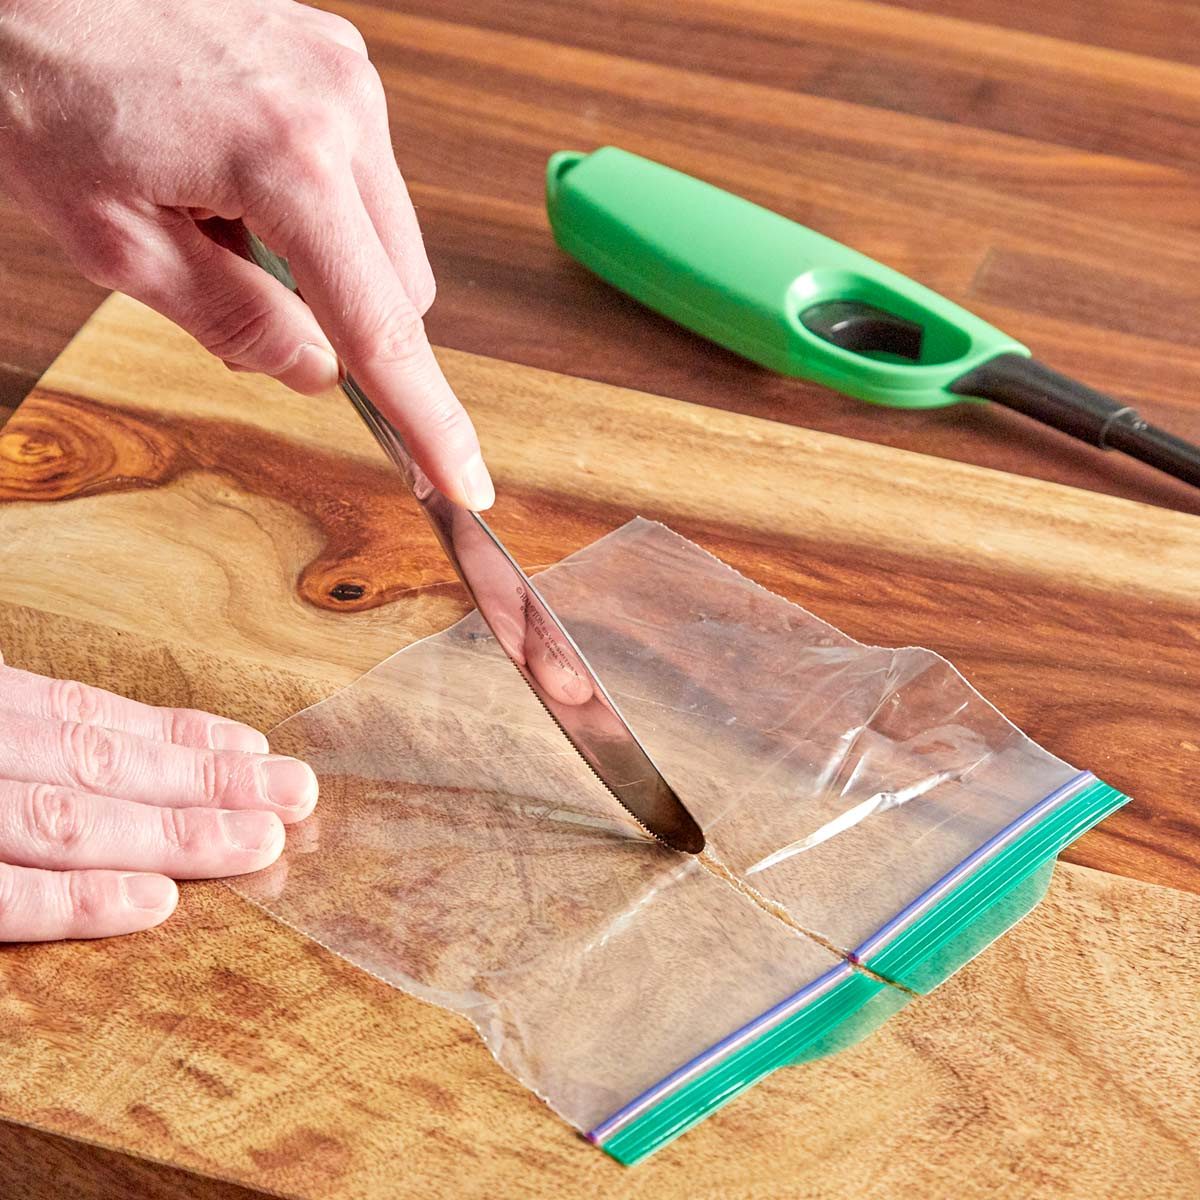 10 Clever Uses for Wax Paper- Fantastic Hacks You've Never Thought Of!